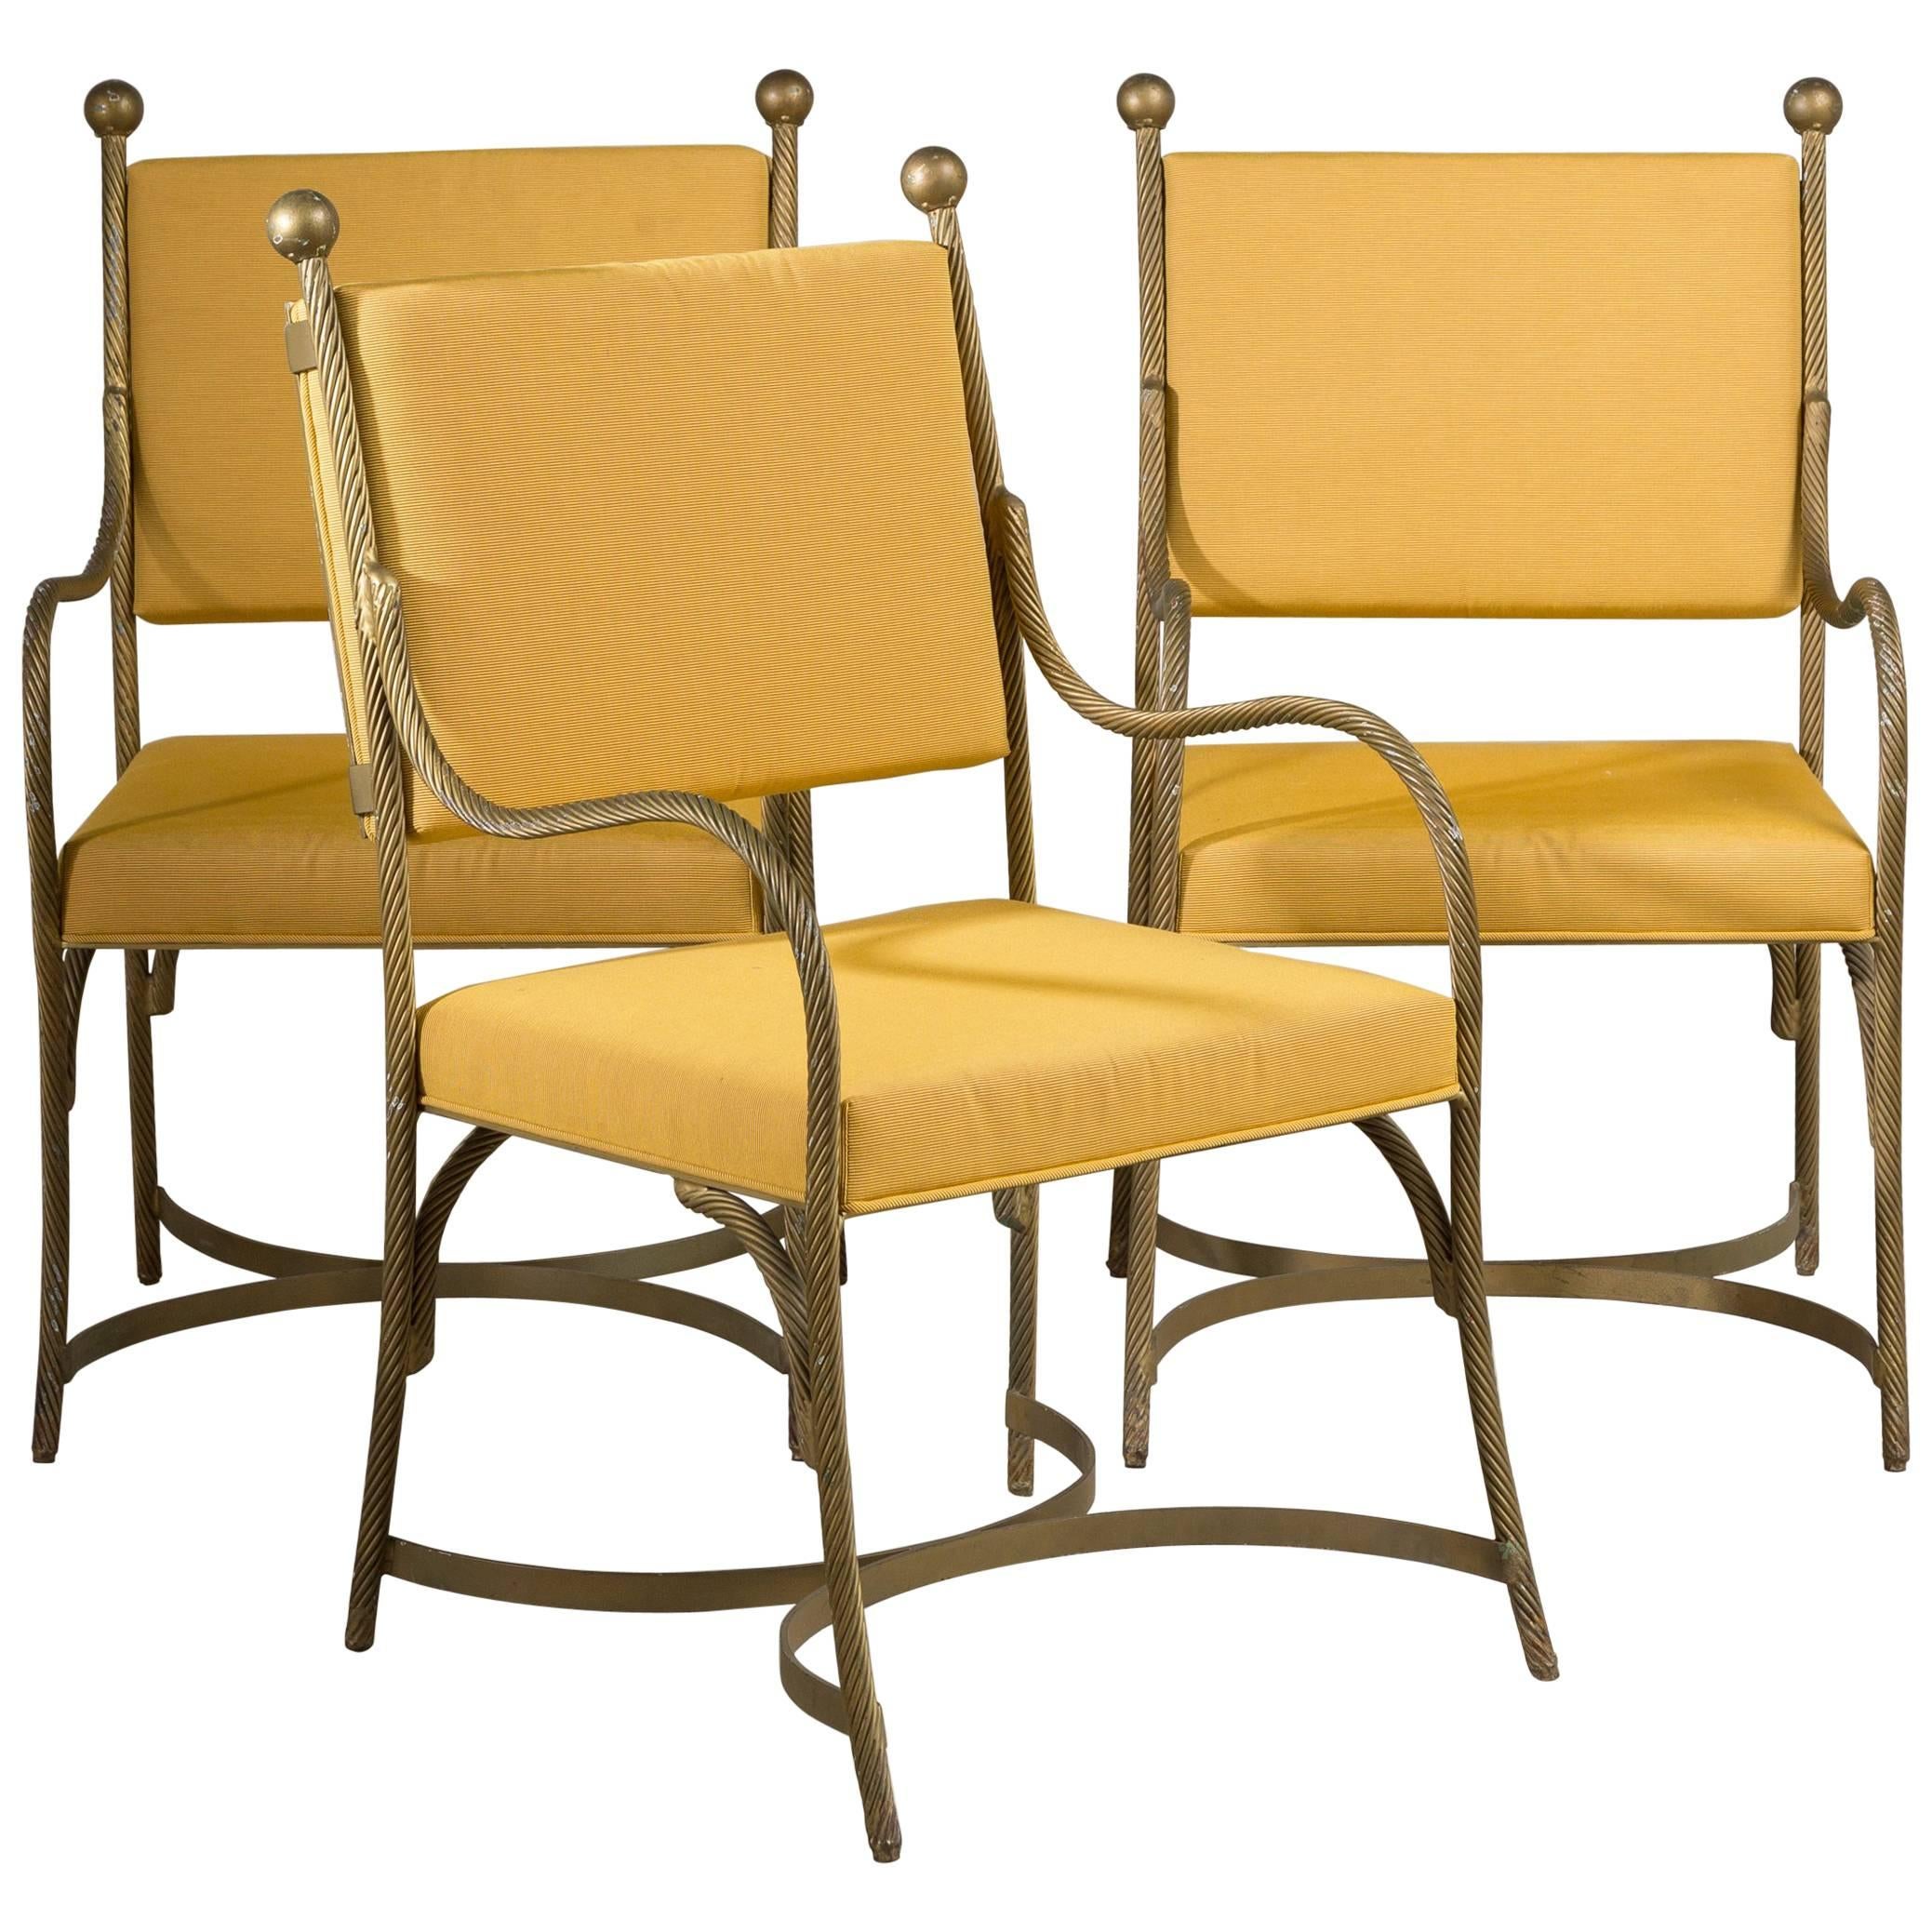 Pair of Heavy Simulated Rope Metal Chairs, 1960s For Sale